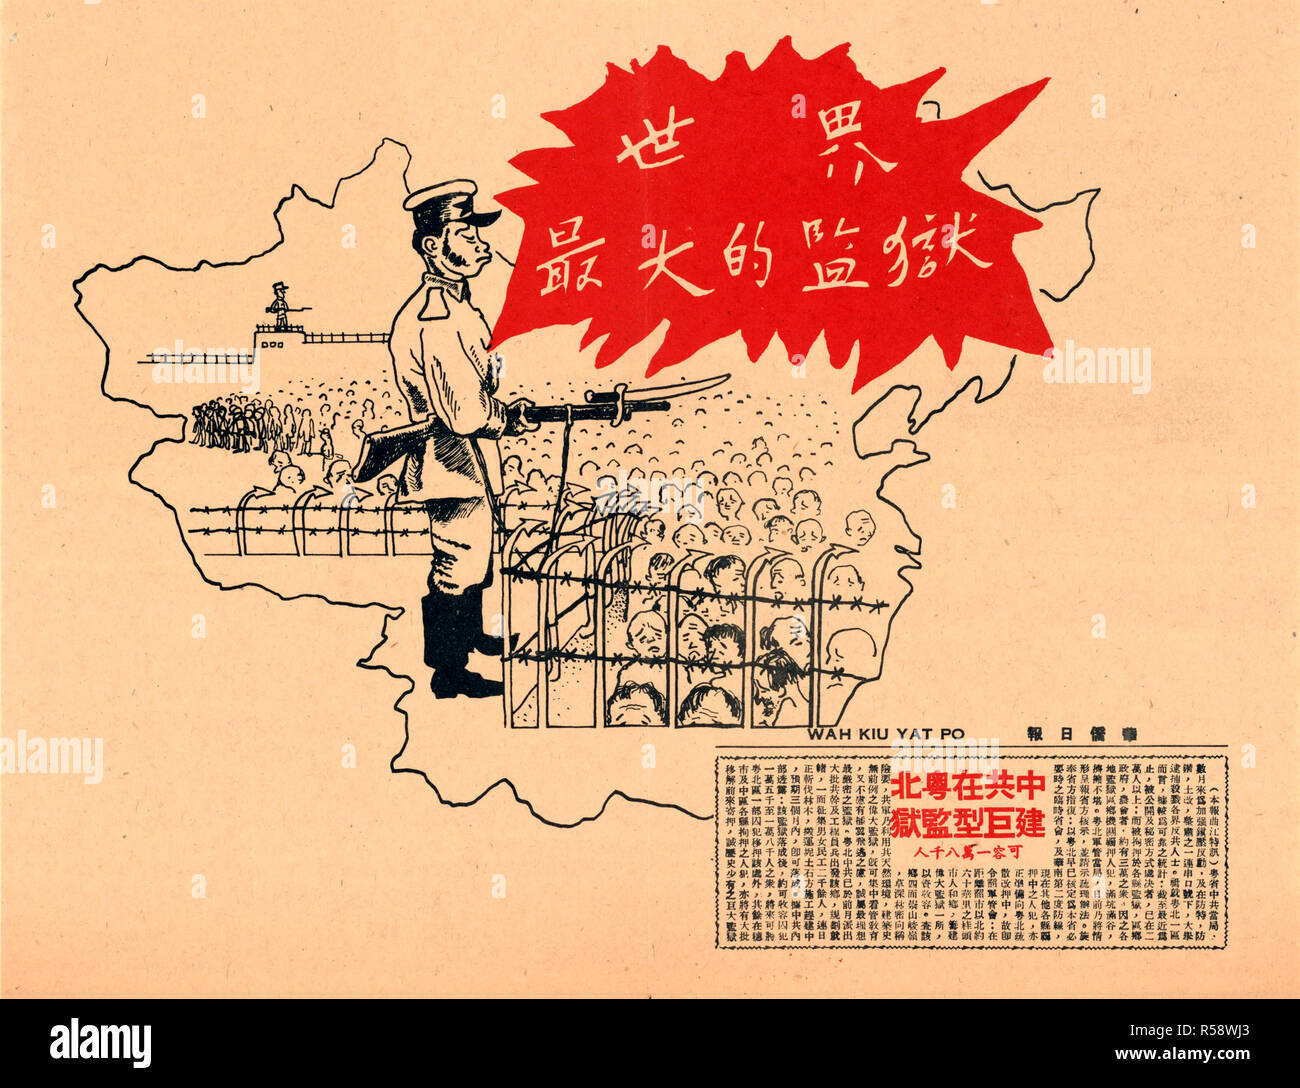 6/22/1951 - U.S. Propaganda Posters in 1950s Asia - Red 'Bastille' poster (written in Chinese) Stock Photo